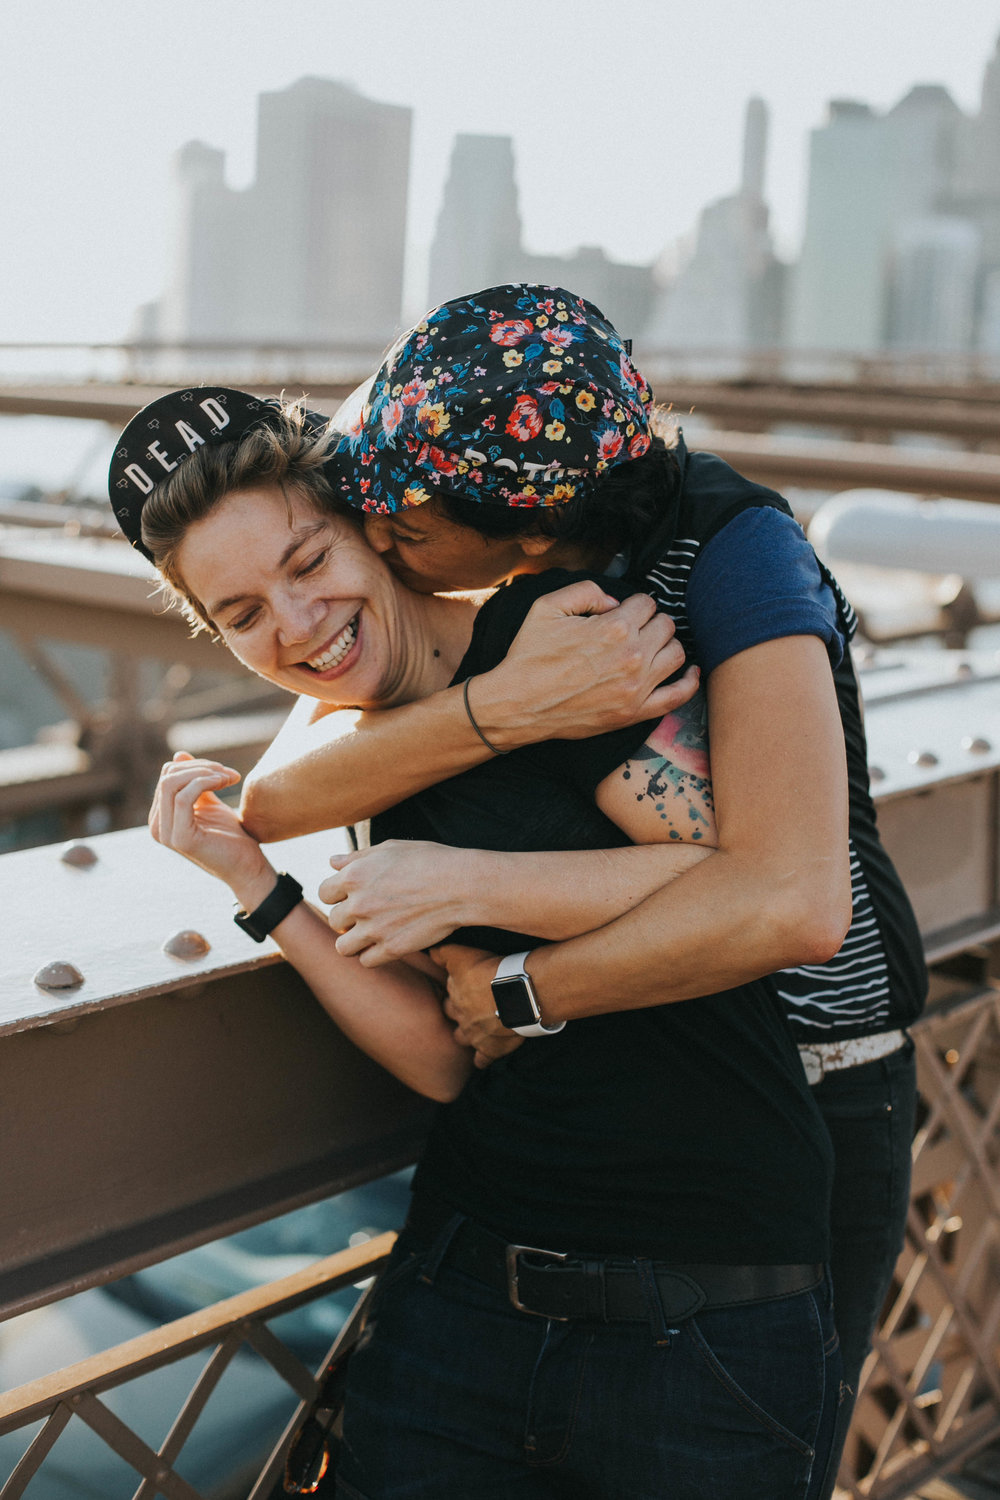 two women embrace in a hug wearing fashion baseball hats covered in flowers and the word "dead" on the brooklyn bridge